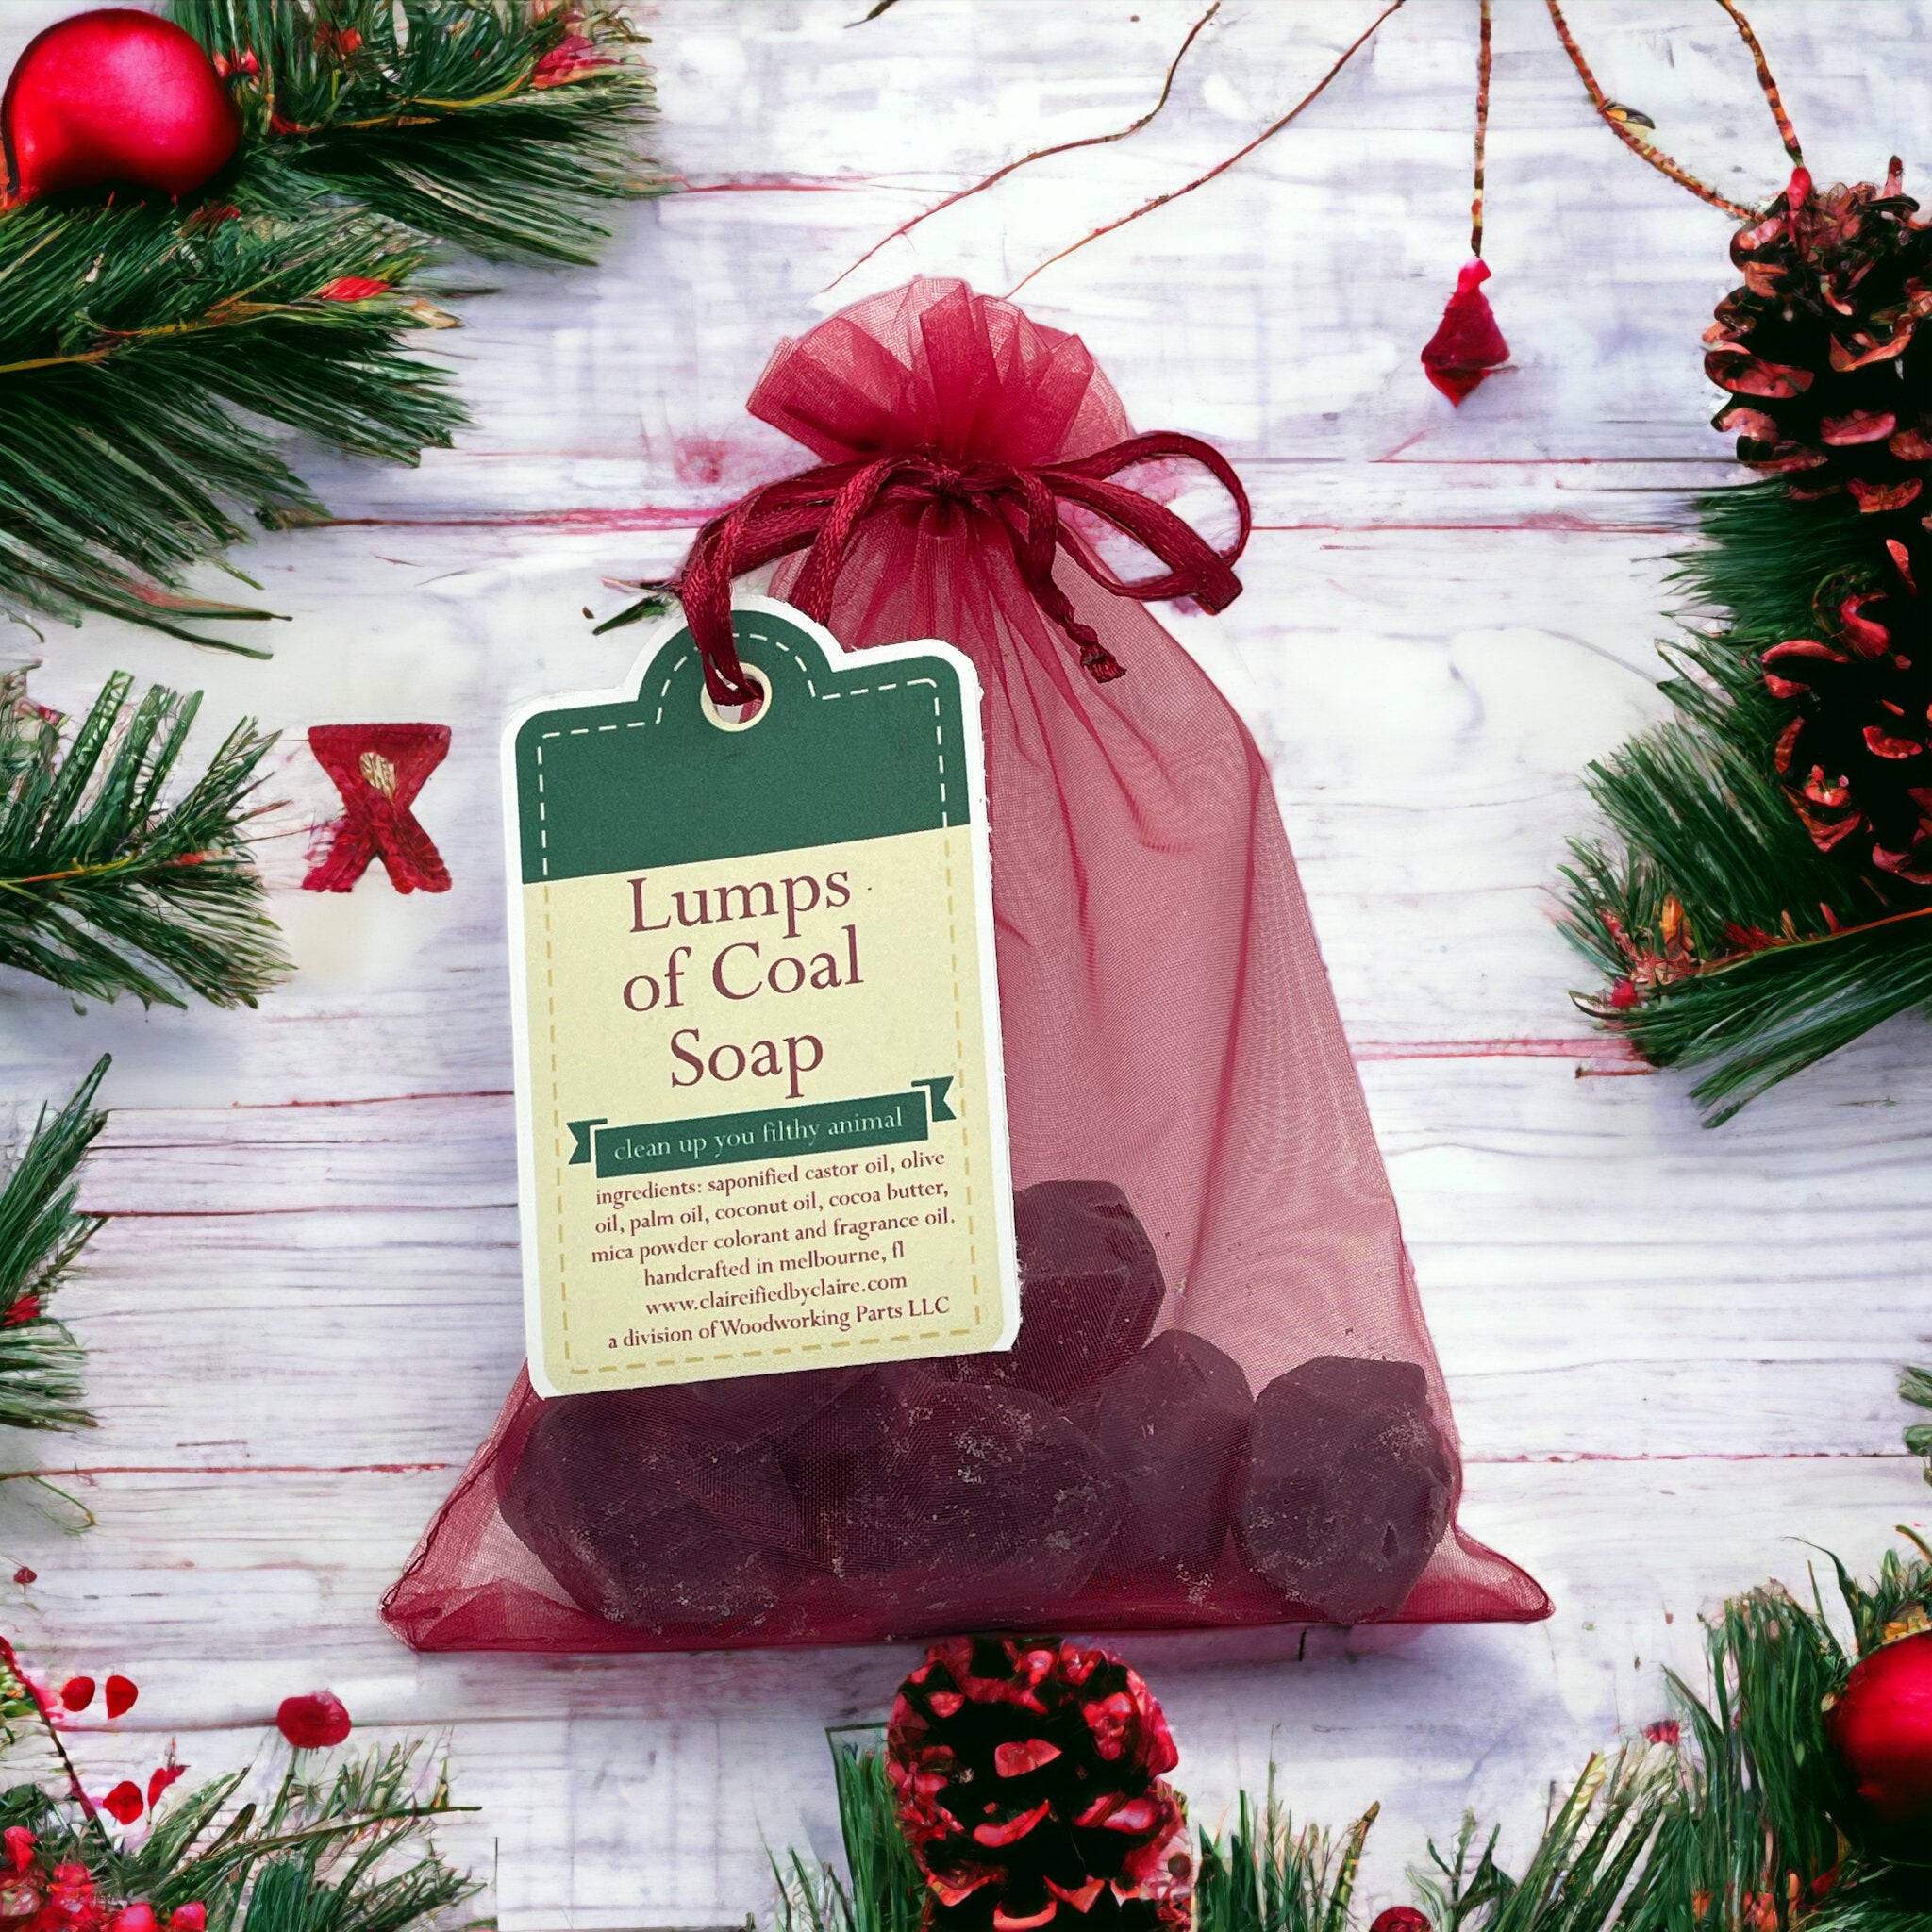 Lumps of Coal Soap with Satchel and Tag